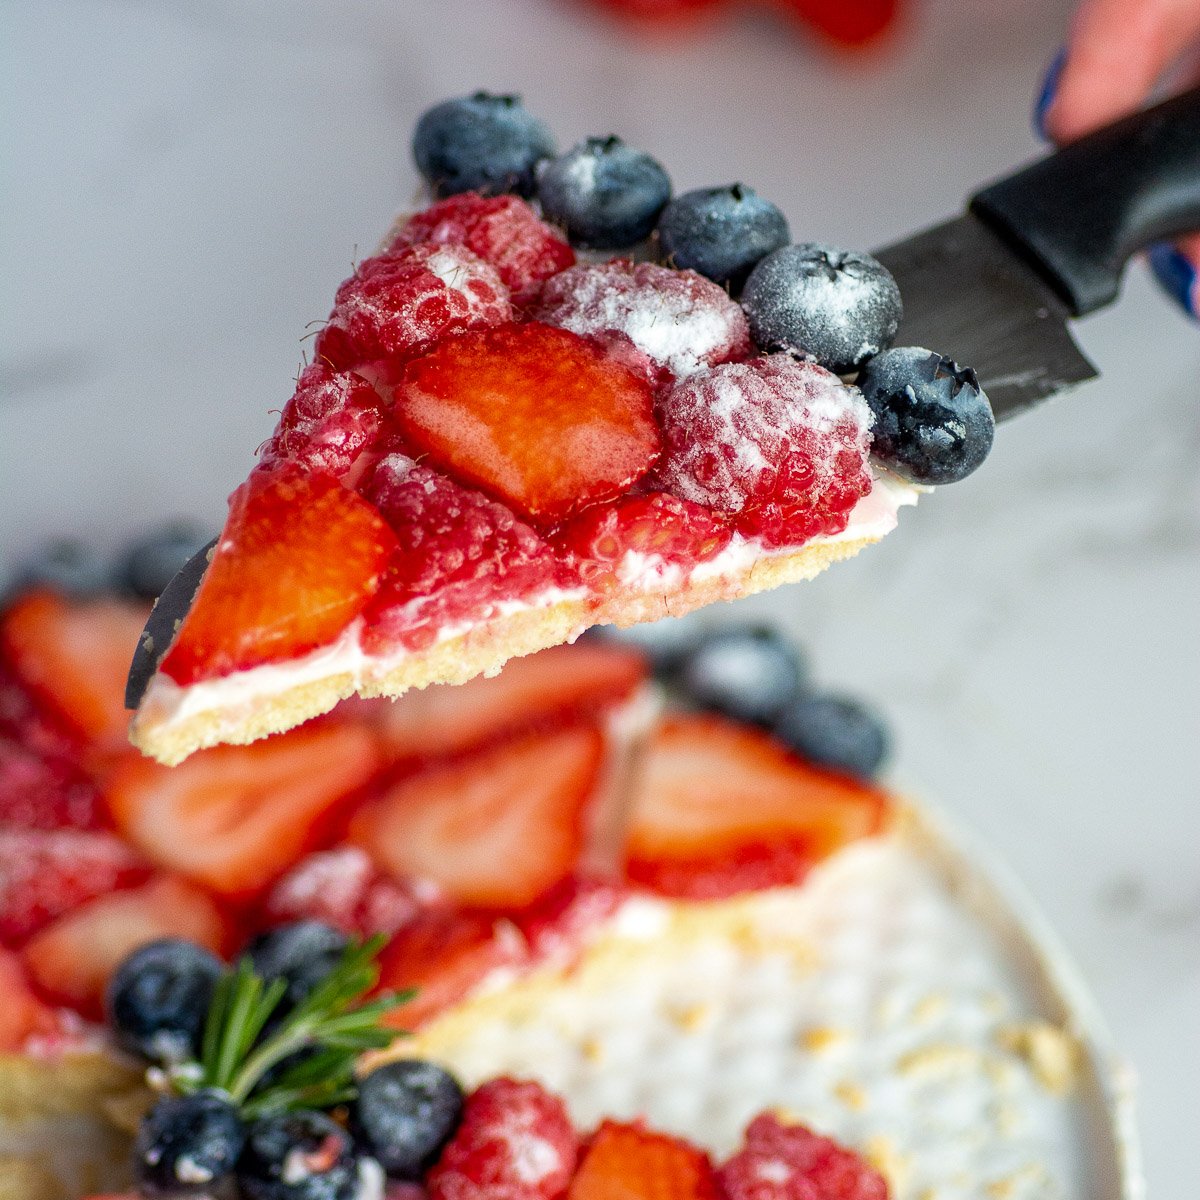 keto fruit pizza featured image